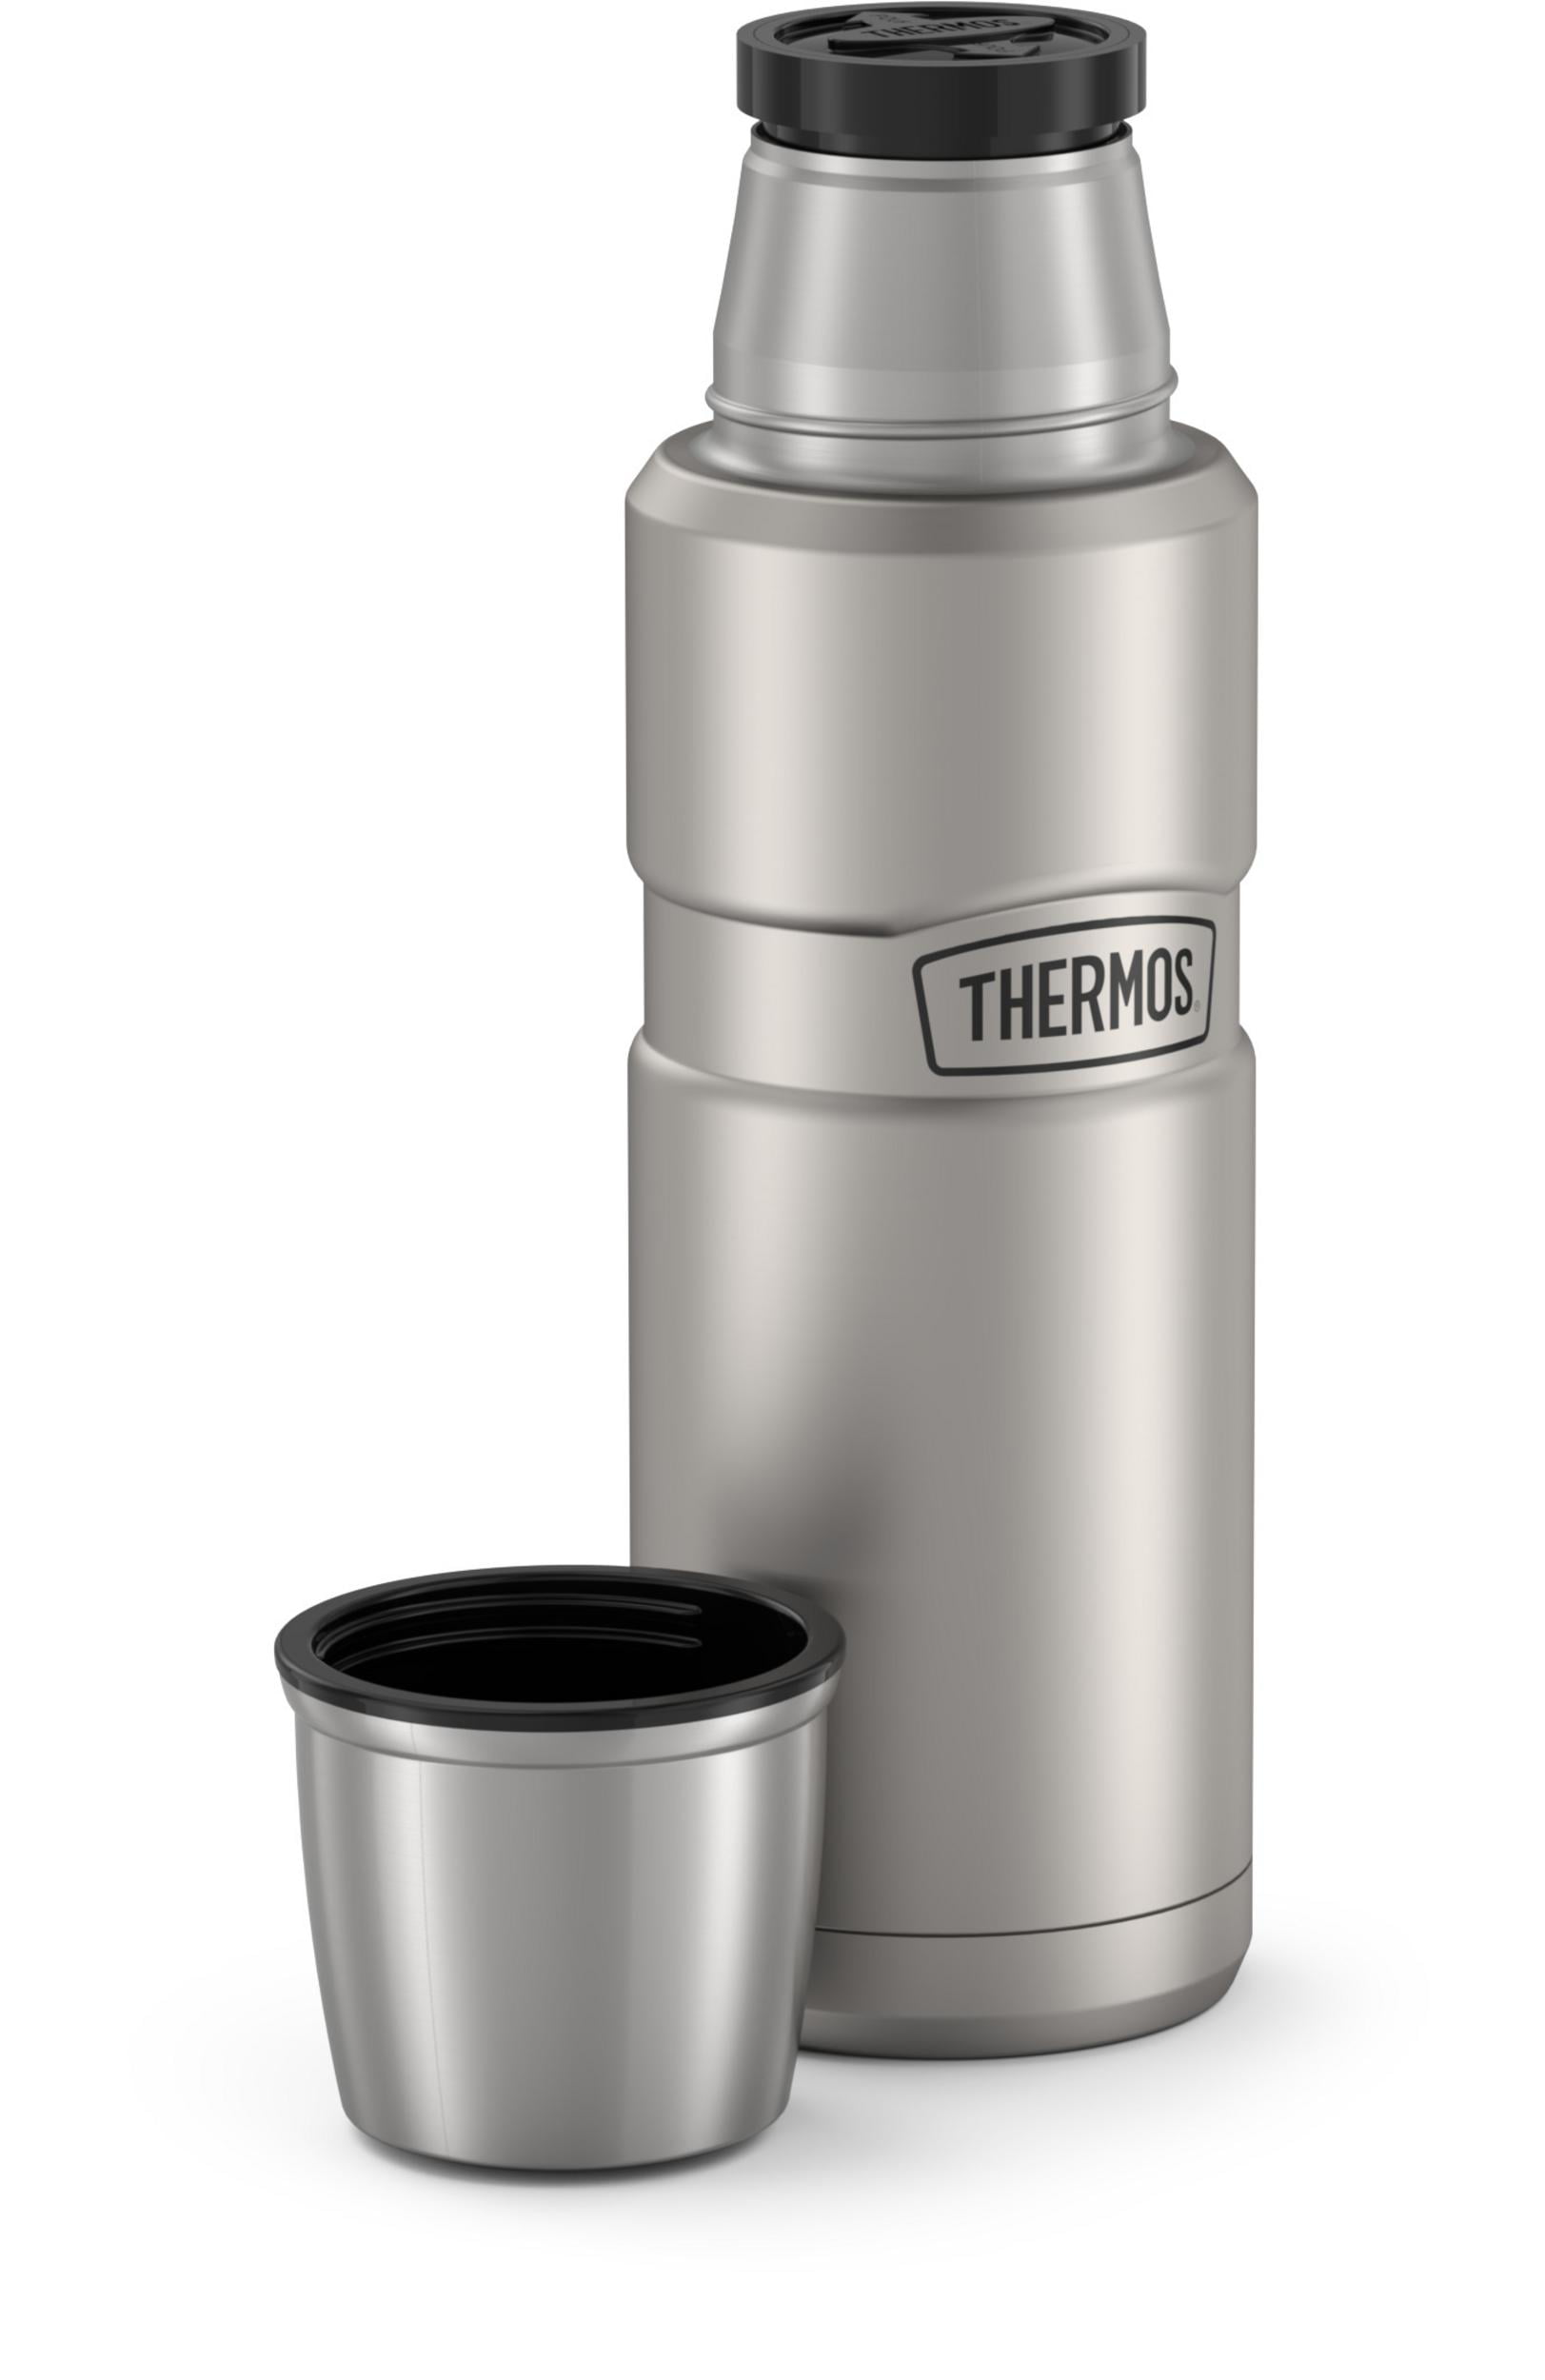 Rock Work Series Stainless Steel Beverage Bottle Thermos 1.1 qt Silver/Black 